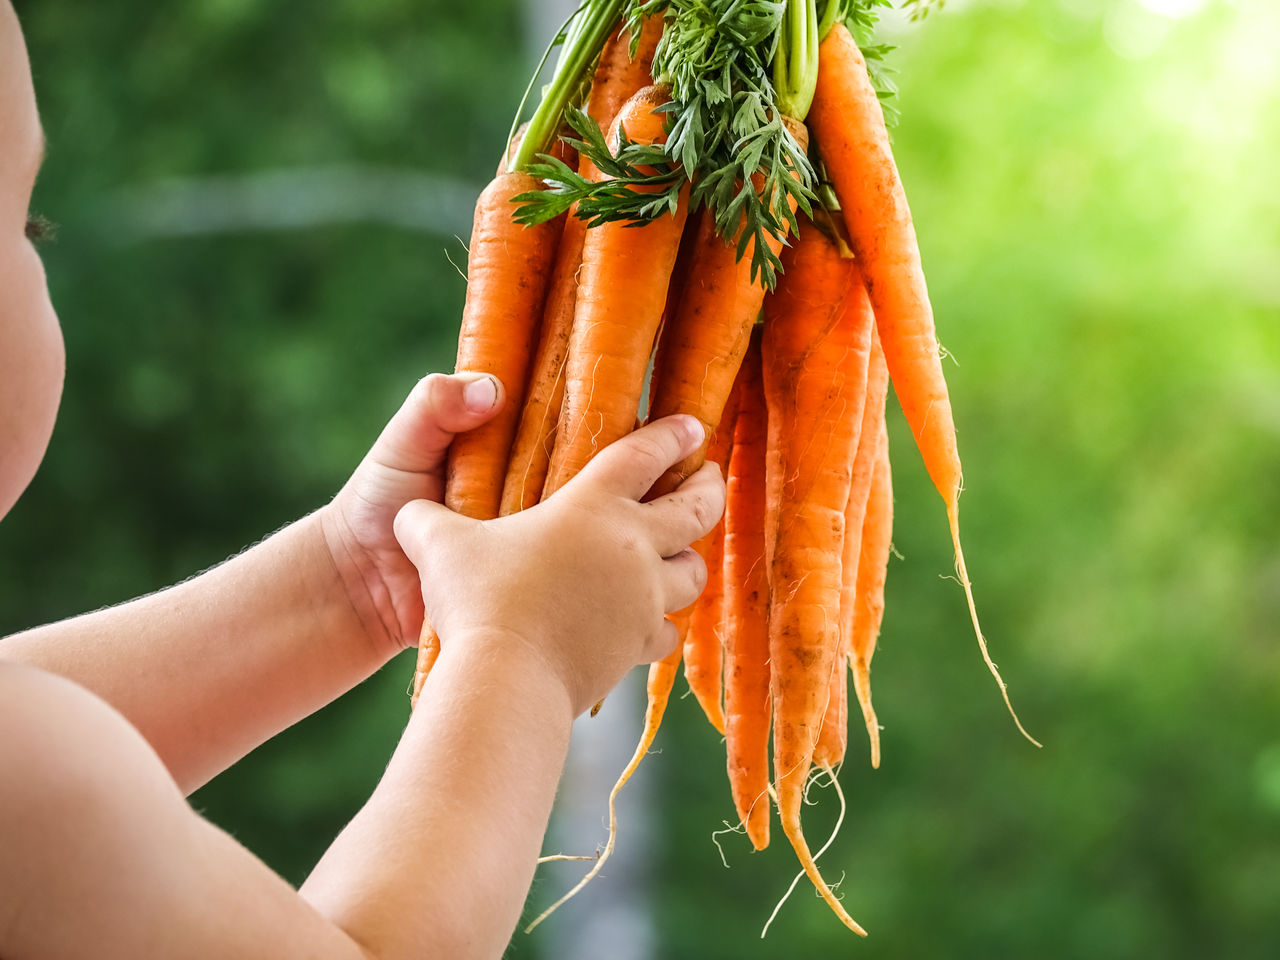 Curious child holding a bundle of carrots in green garden. Concept for sustainable ecological farming and harvest.